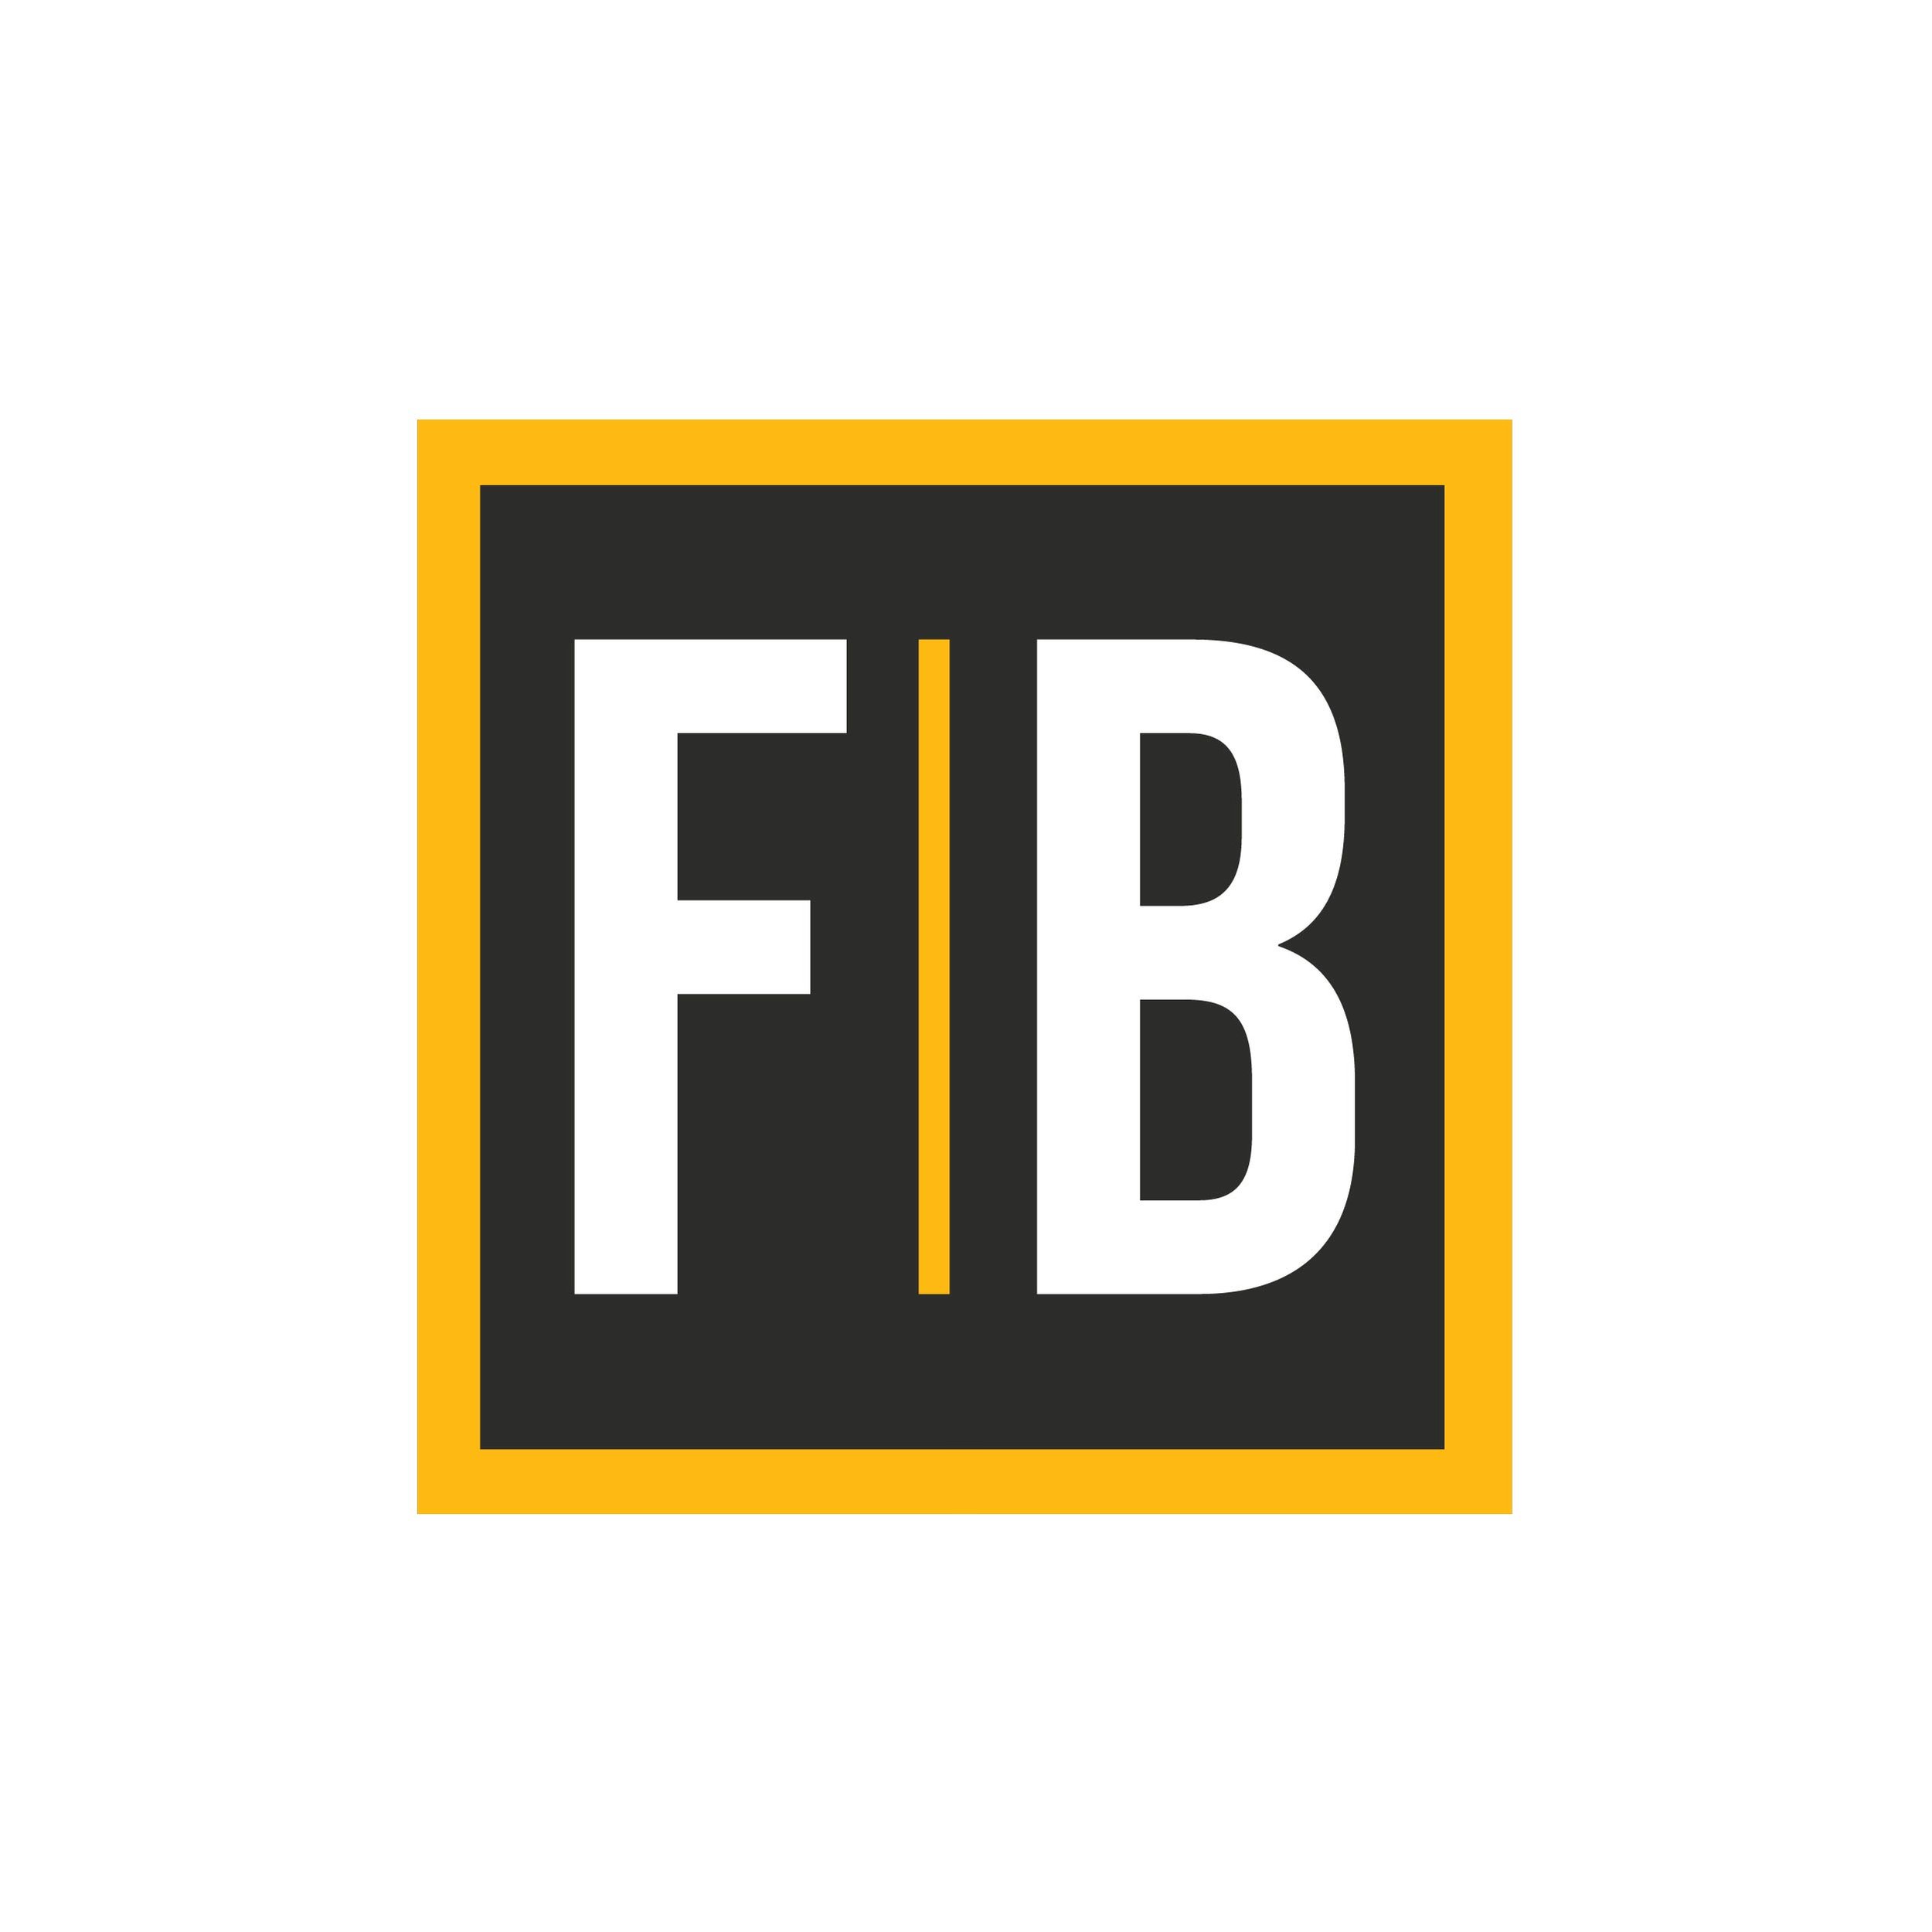 First_Boulevard_New_Logo_Approved_Selective_Jet_ROOTfiles_IconF_YellowBoxLine_JetBG_WhiteType.jpg